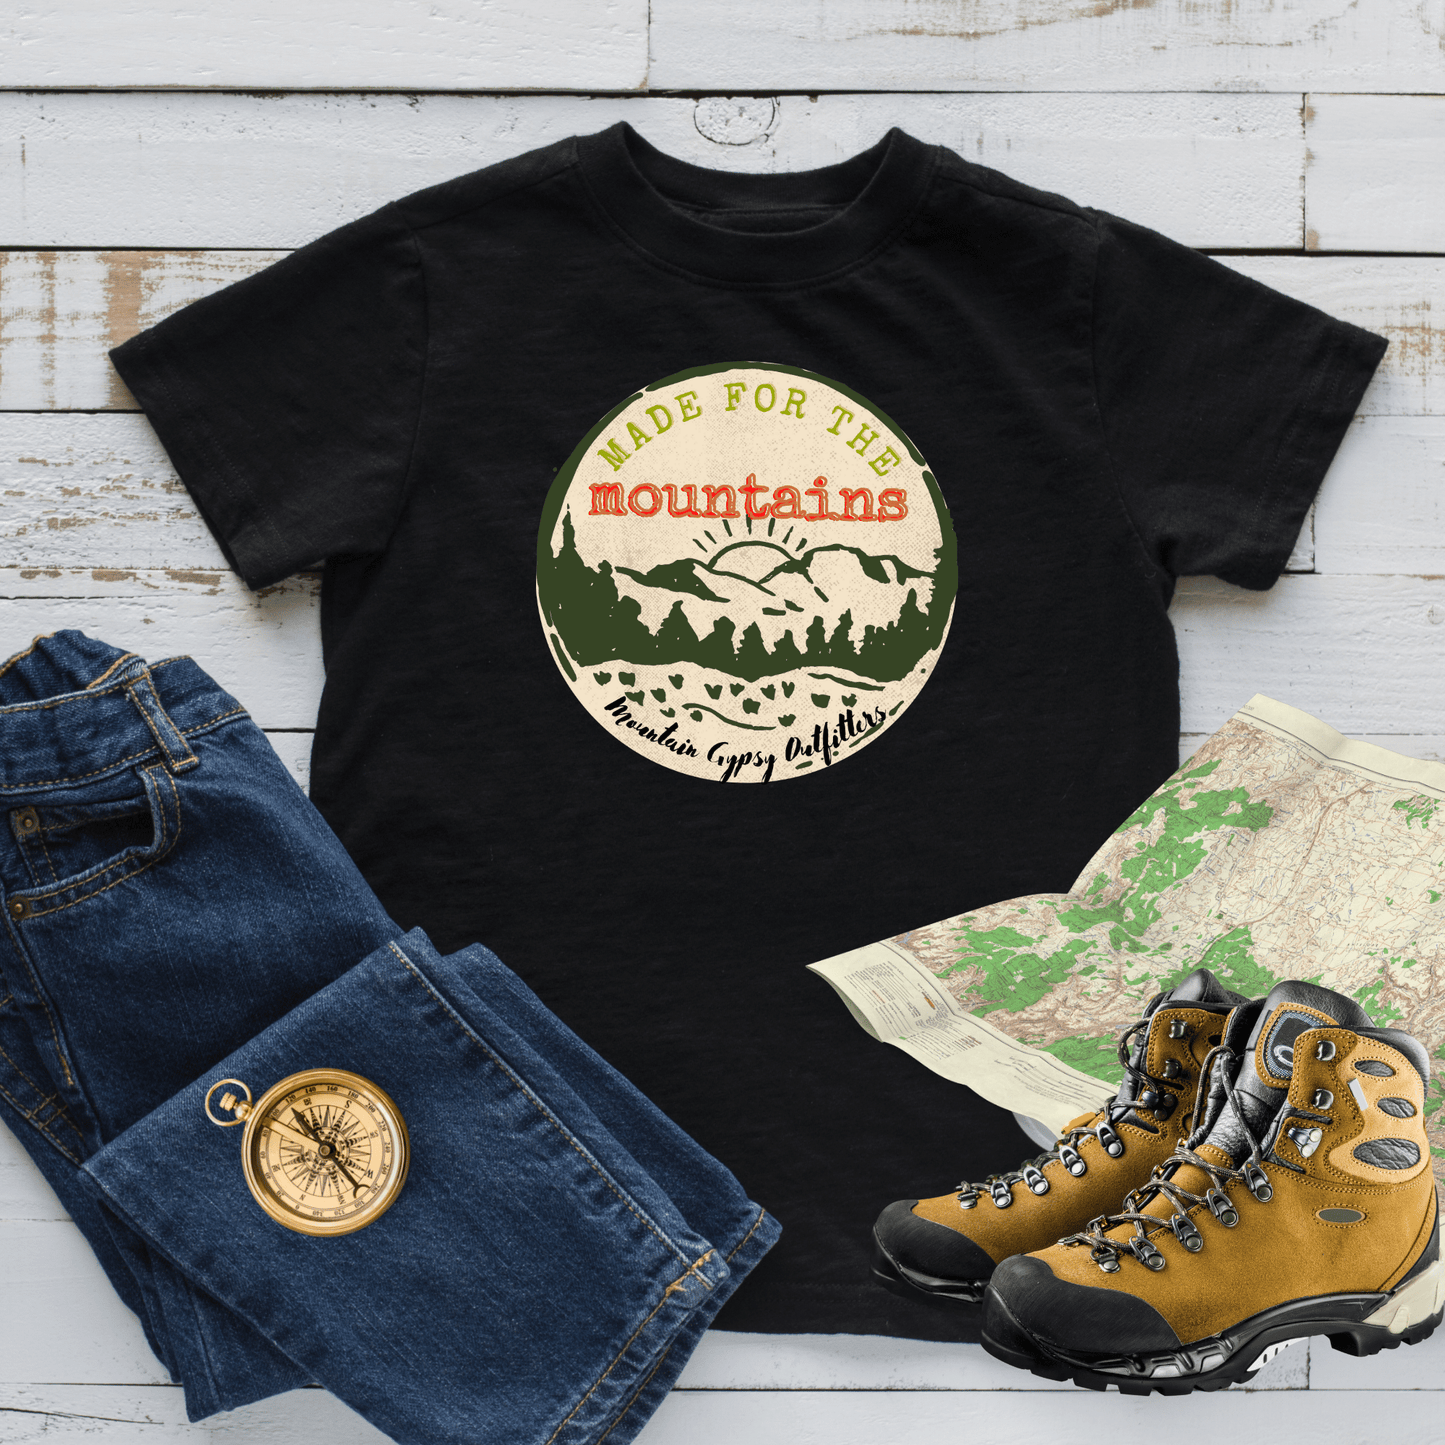 Made for the Mountains Kid's Tee